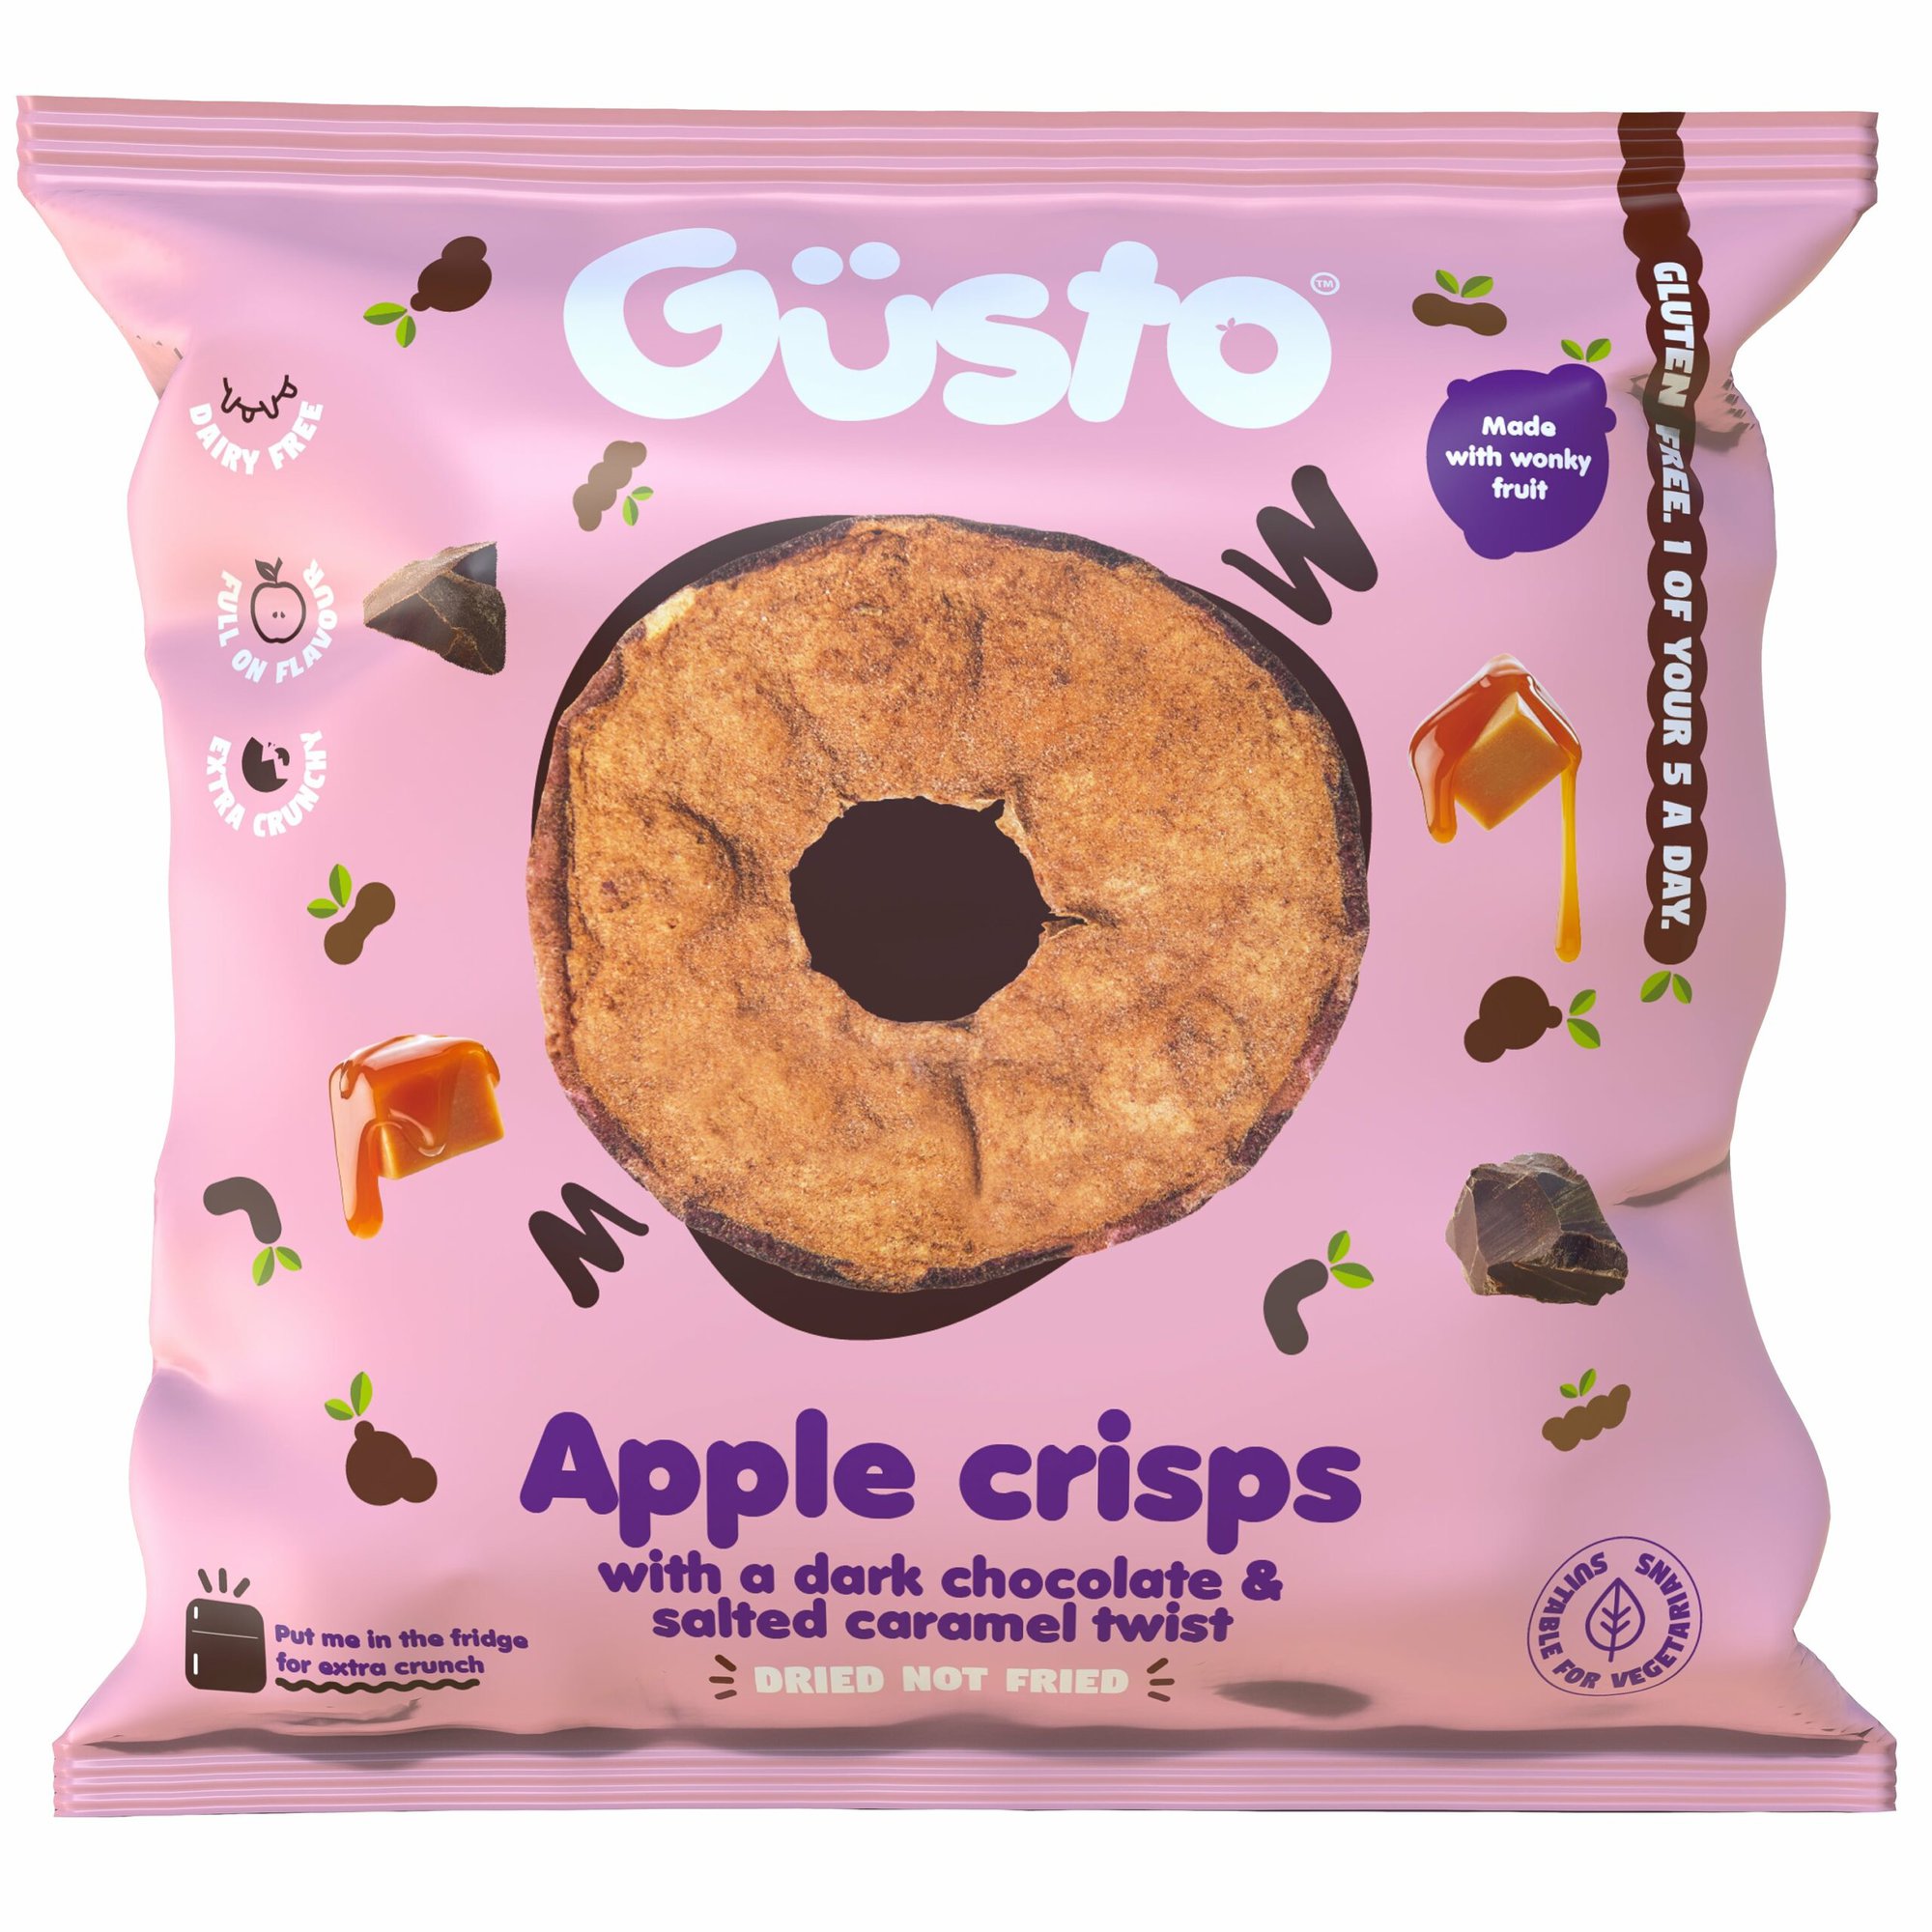 Air-dried wonky apple crisps with a chocolate & salted caramel twist